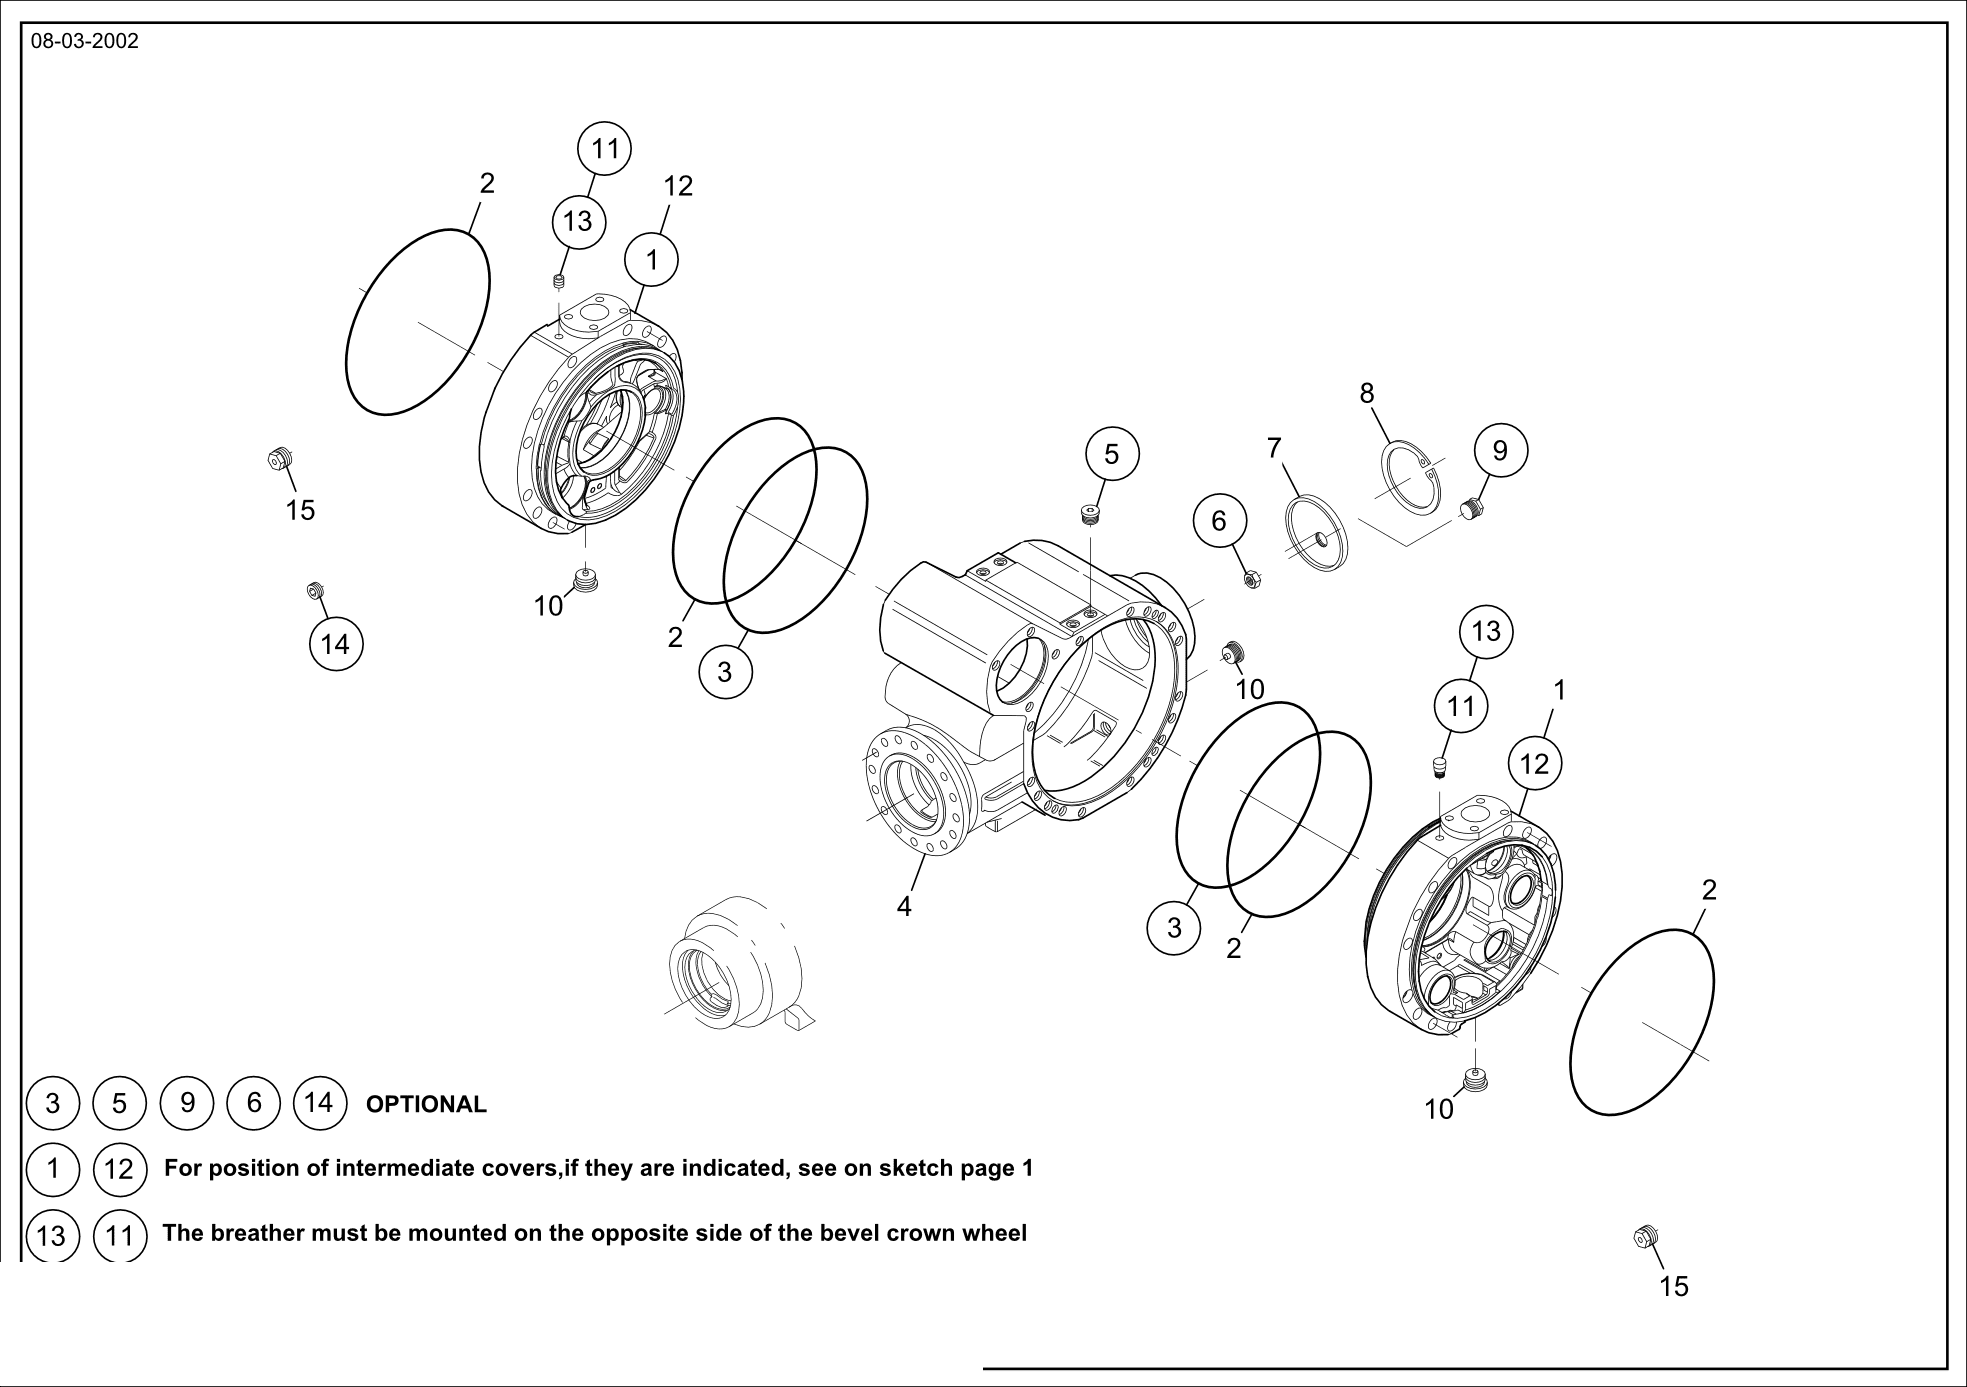 drawing for BUCYRUS 015424-1-10 - INTERMEDIATE COVER (figure 3)